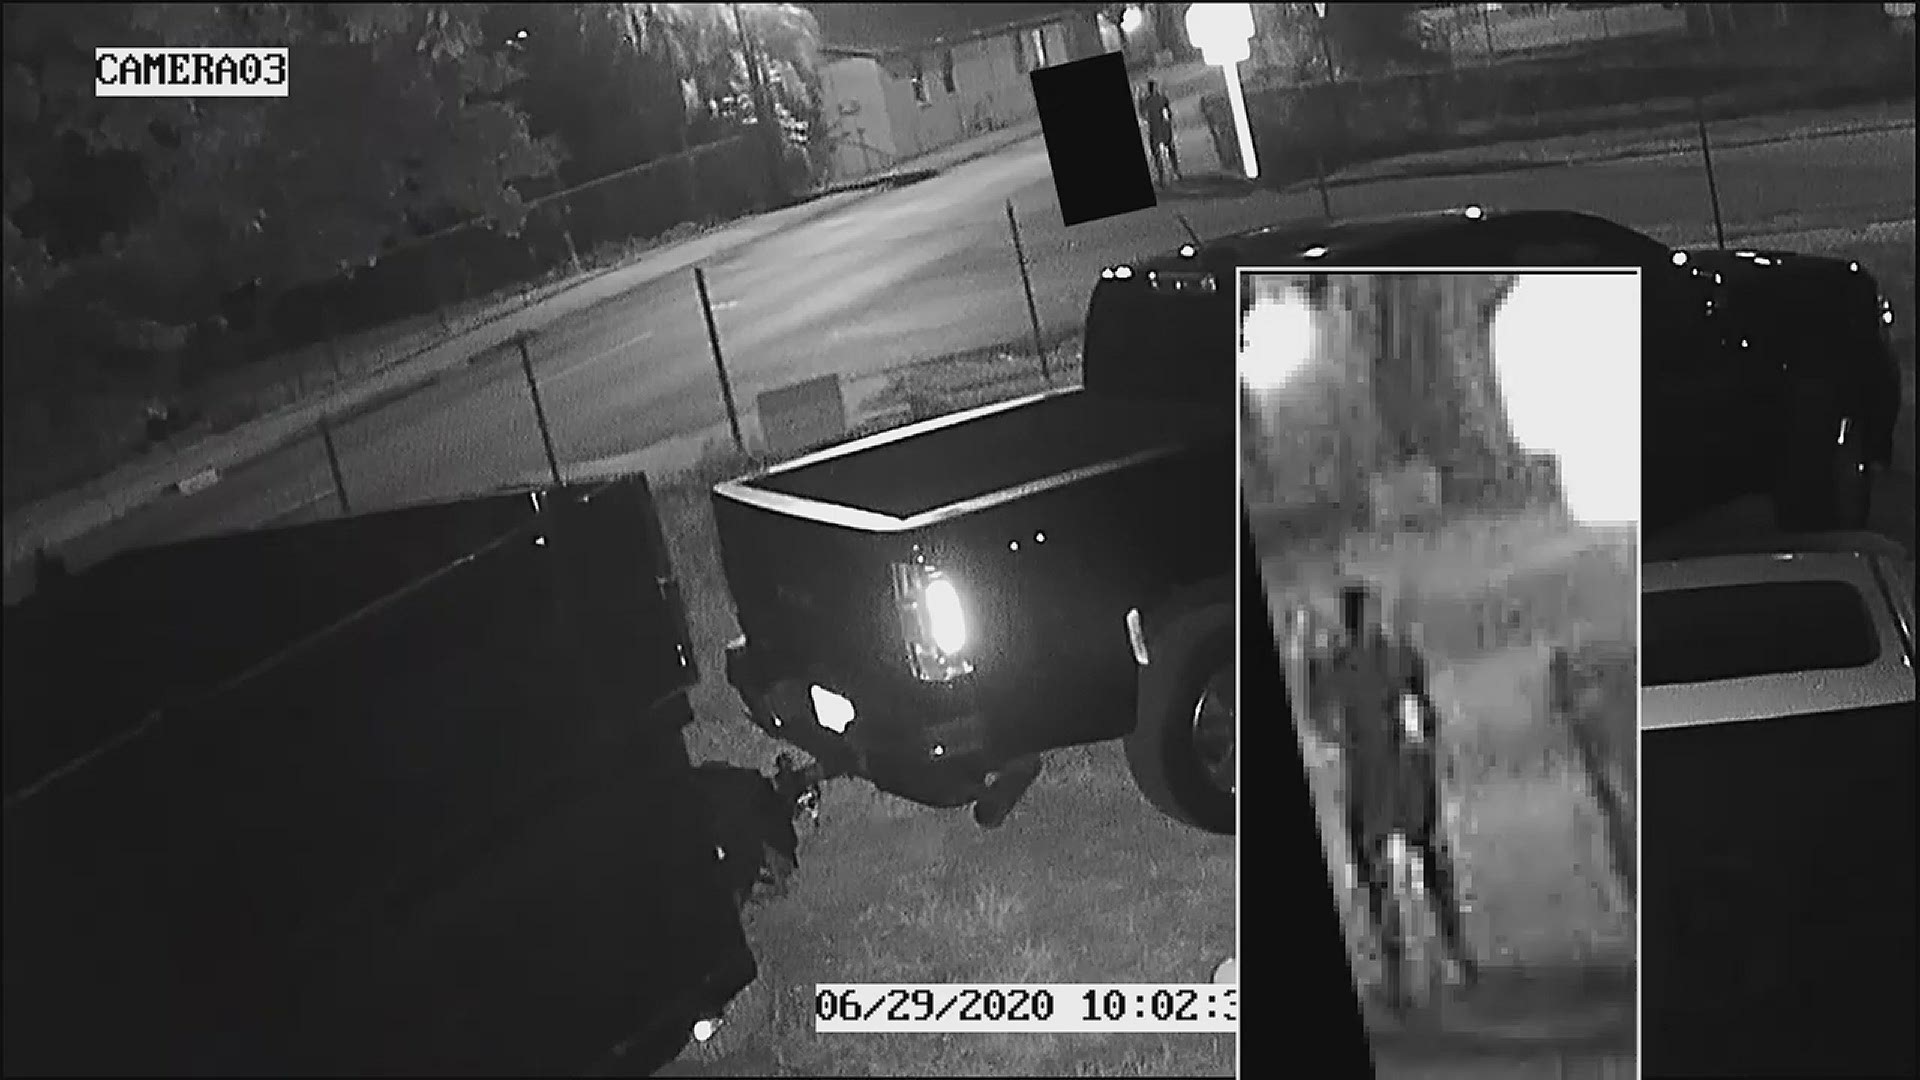 Police say surveillance video captured two men walking together prior to a deadly shooting.